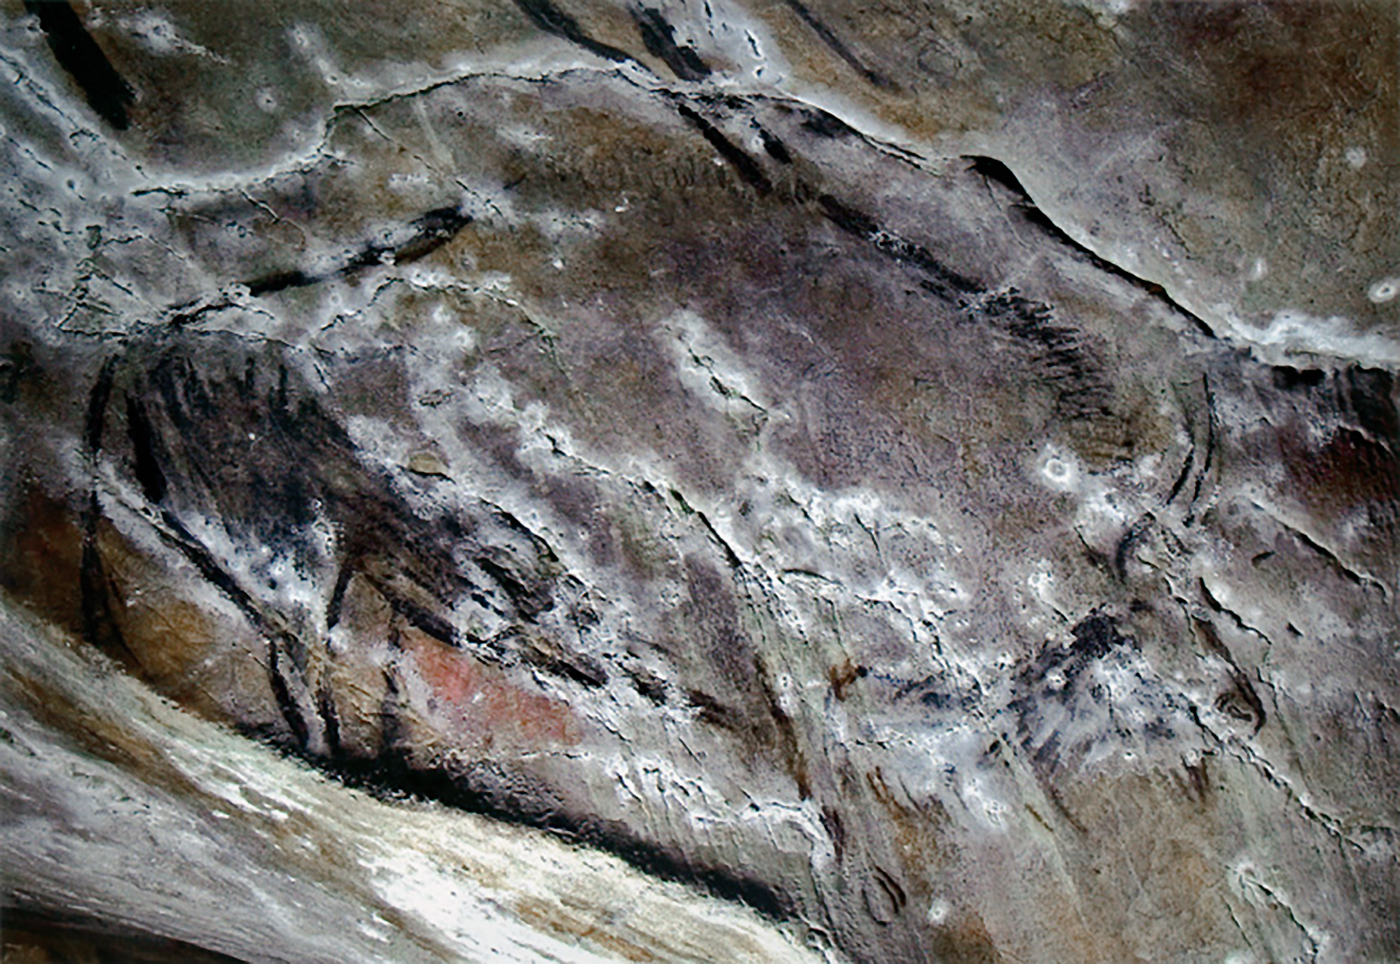 A Bison from the Niaux cave follows the natural ridge of the cave wall